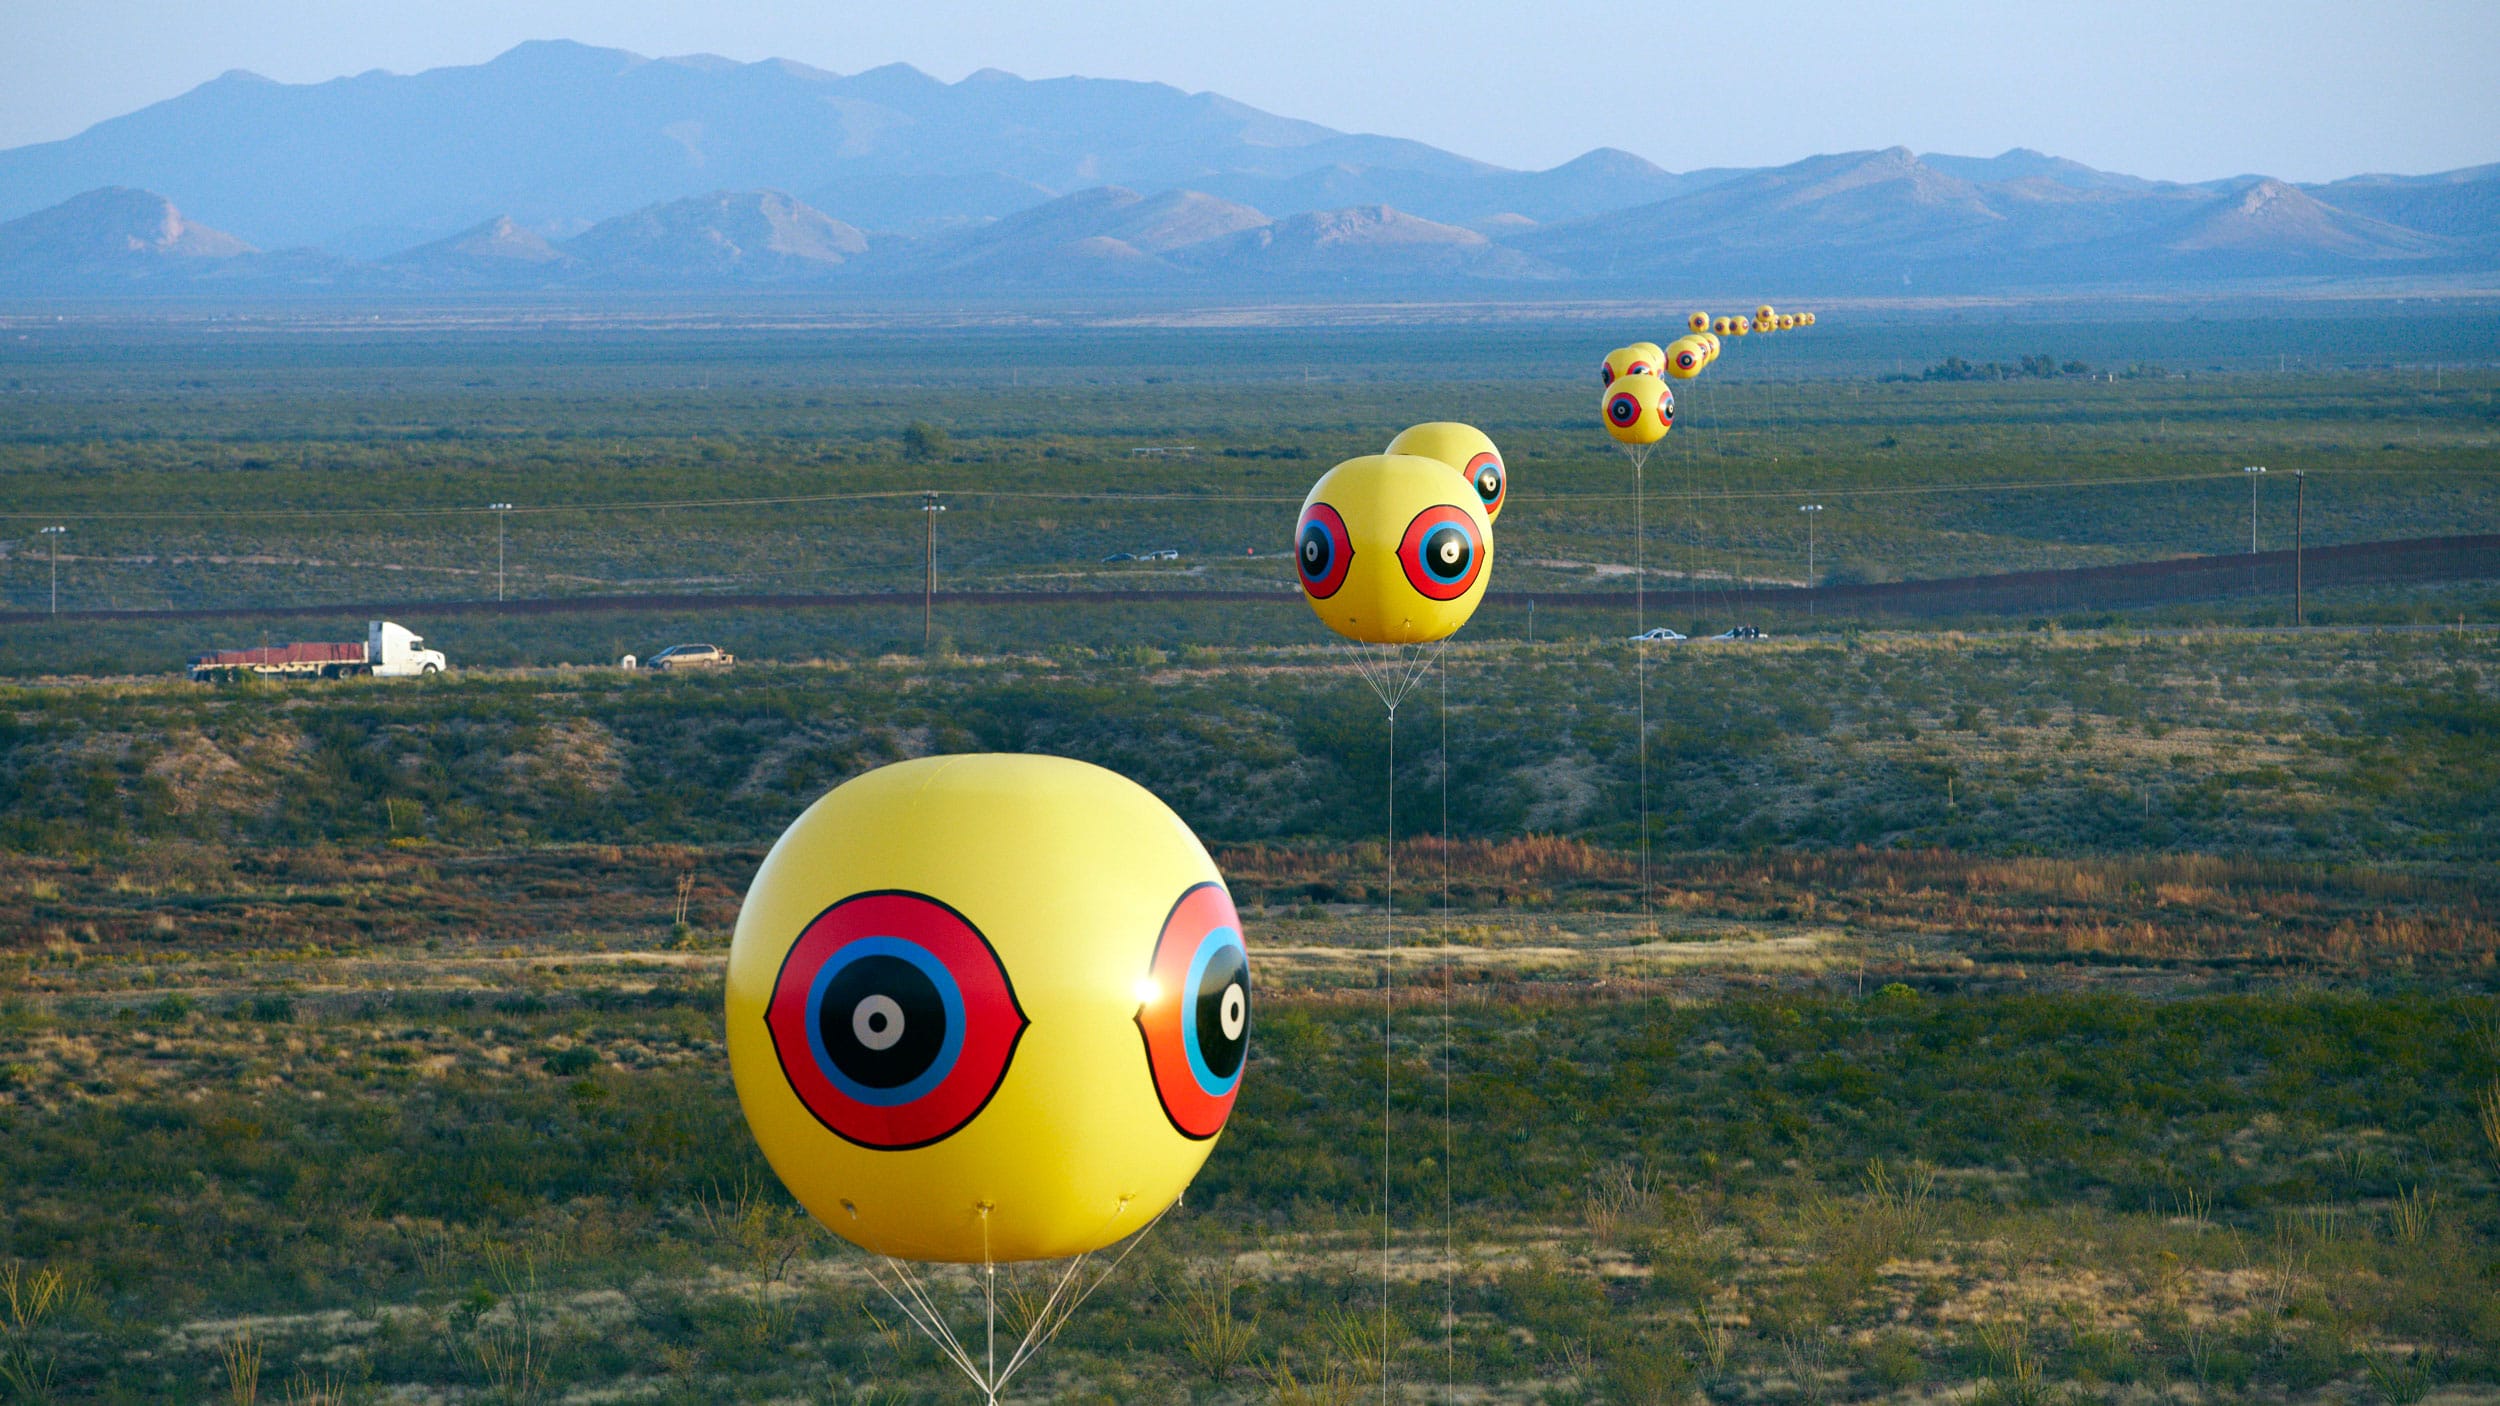 Giant yellow balloons with red and black designs in a row for miles through a landscape with mountains in the background